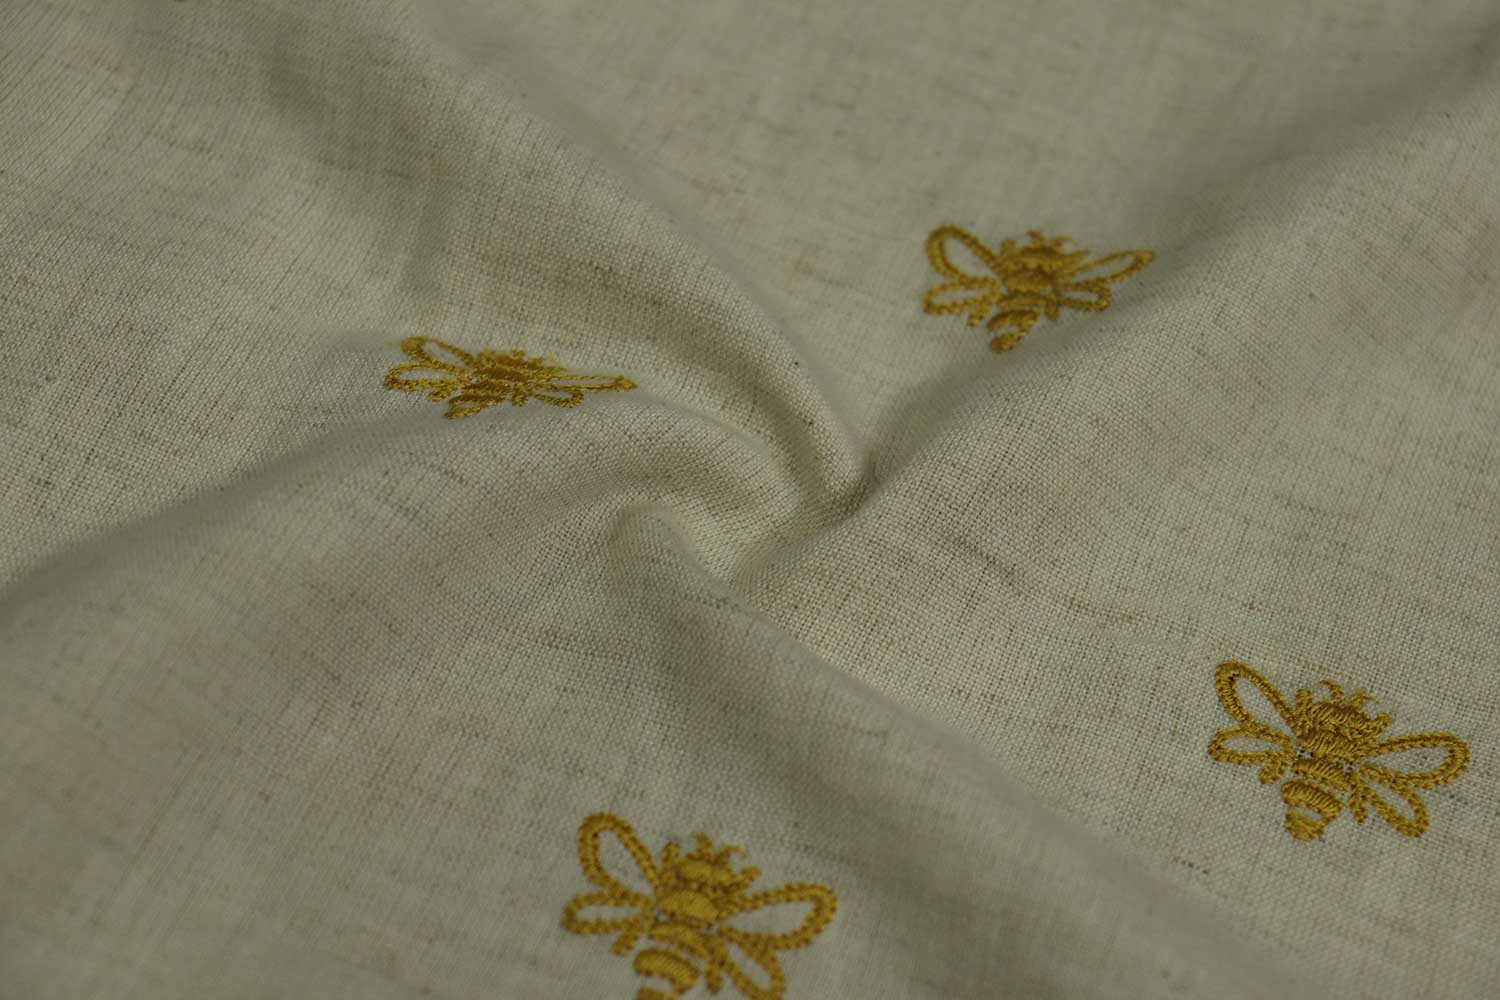 Embroidered cotton fabric with honey bee motifs, perfect for vintage dresses, skirts, bowties, dog bandanas & pinup clothing.